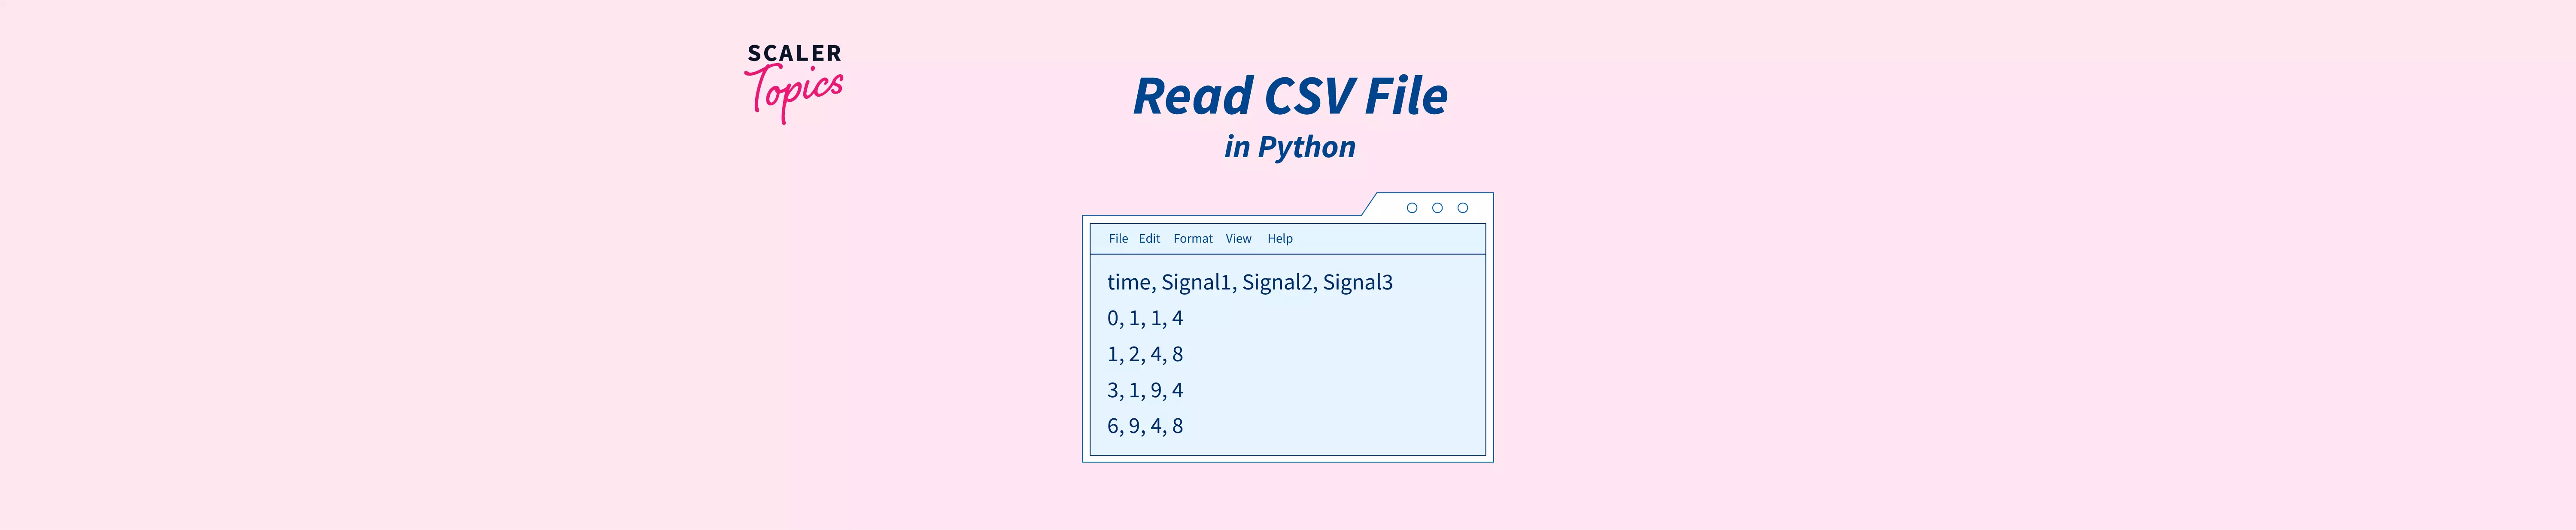 How to Read & Write With CSV Files in Python? - Analytics Vidhya